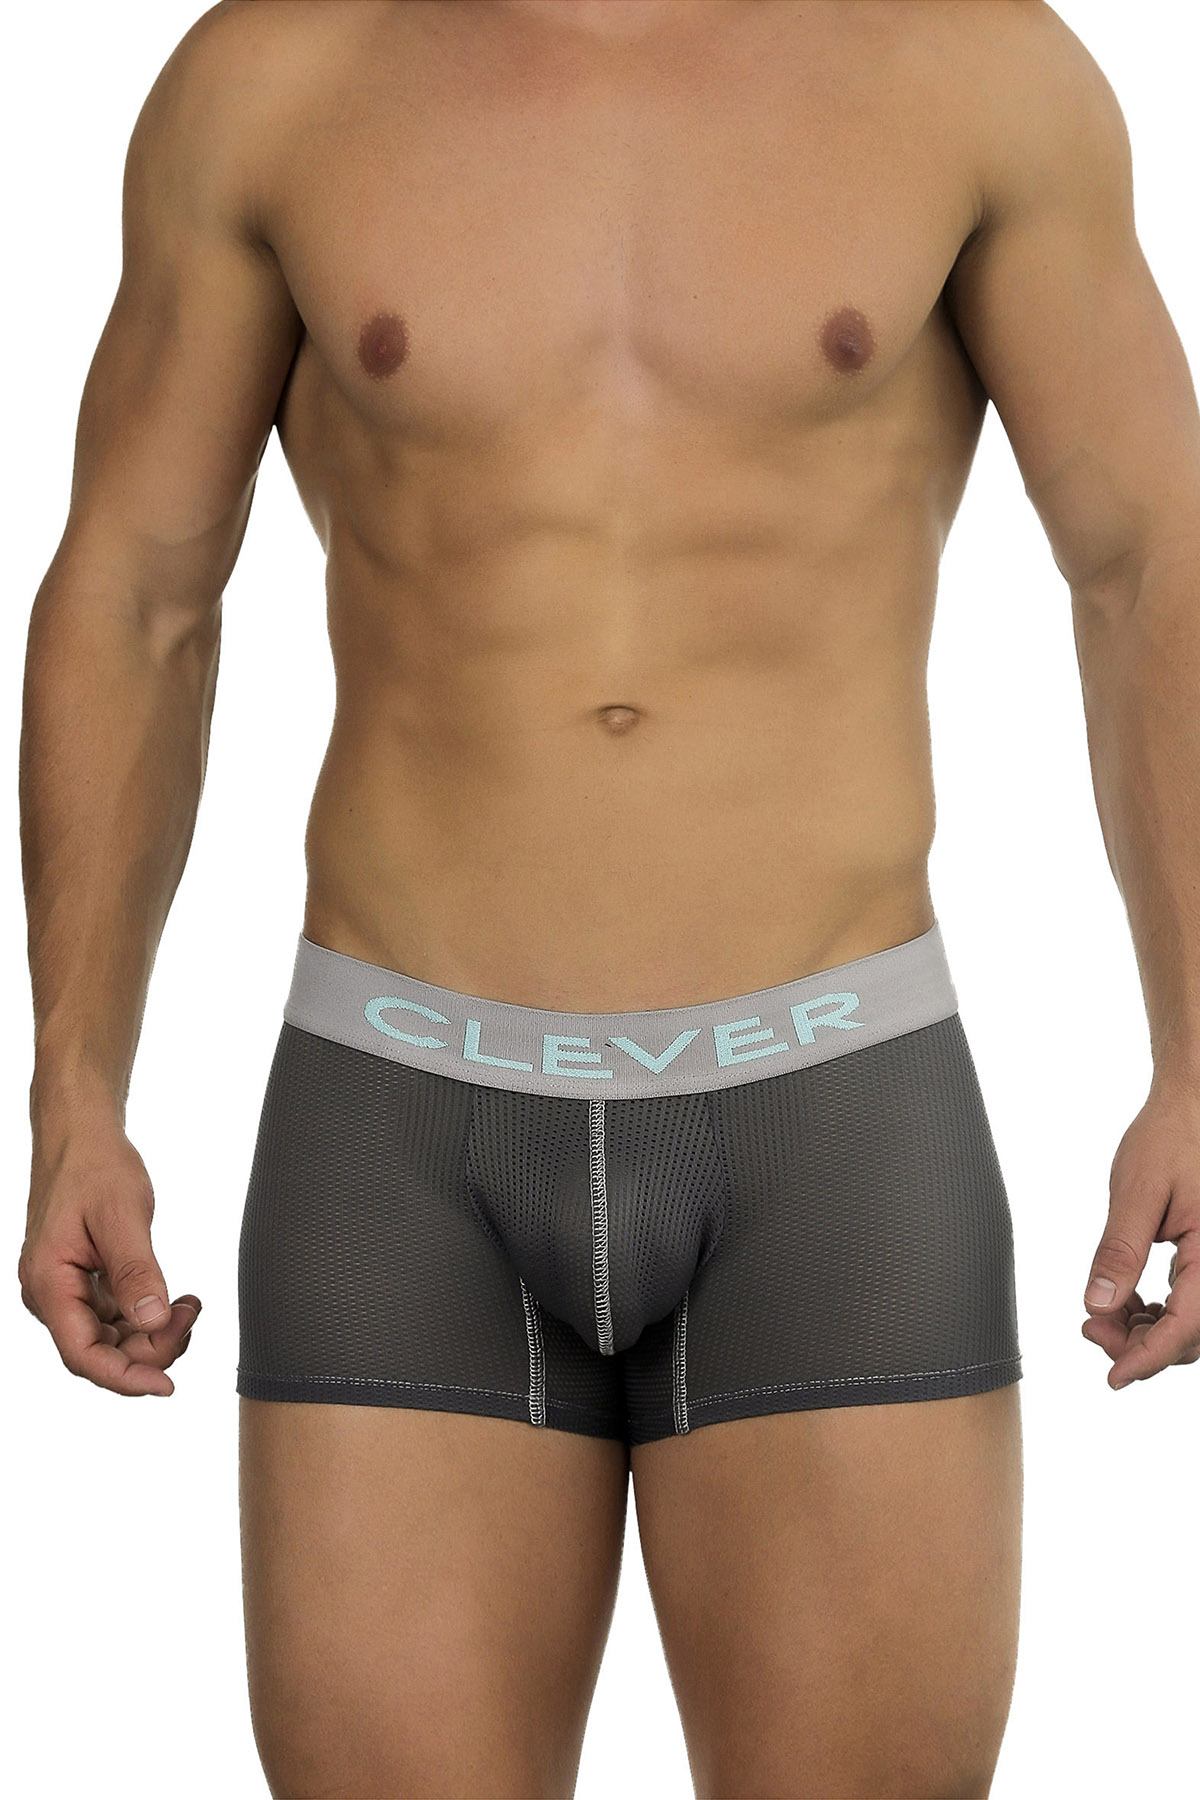 Clever Limited Edition Grey Sport Mesh Trunk 219979